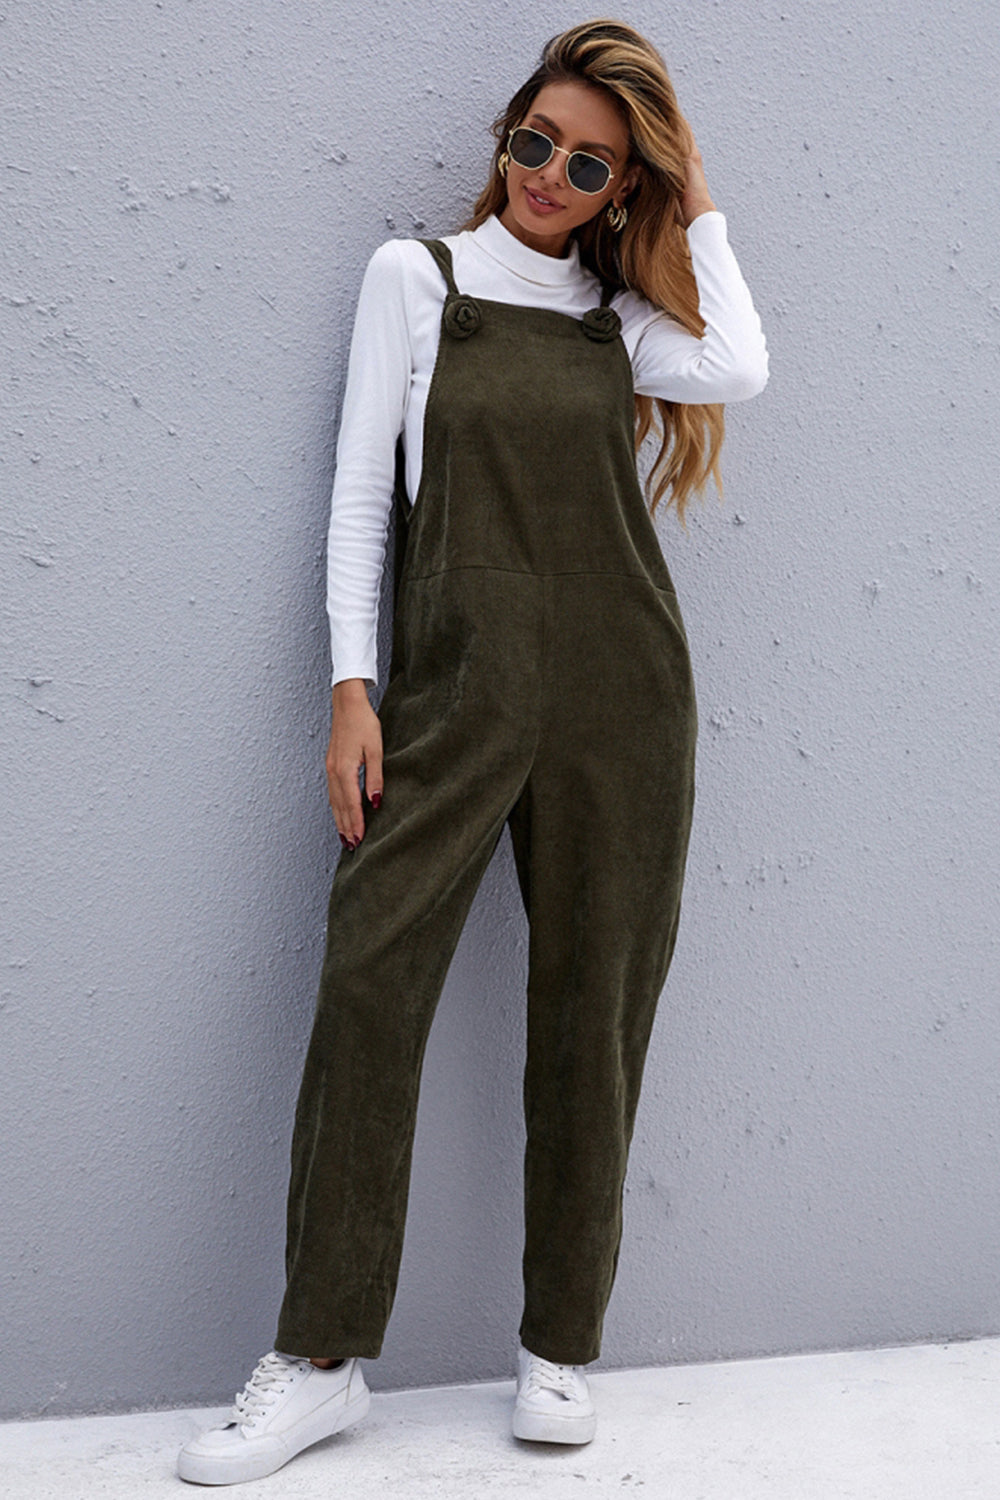 Corduroy Solid Color Overalls